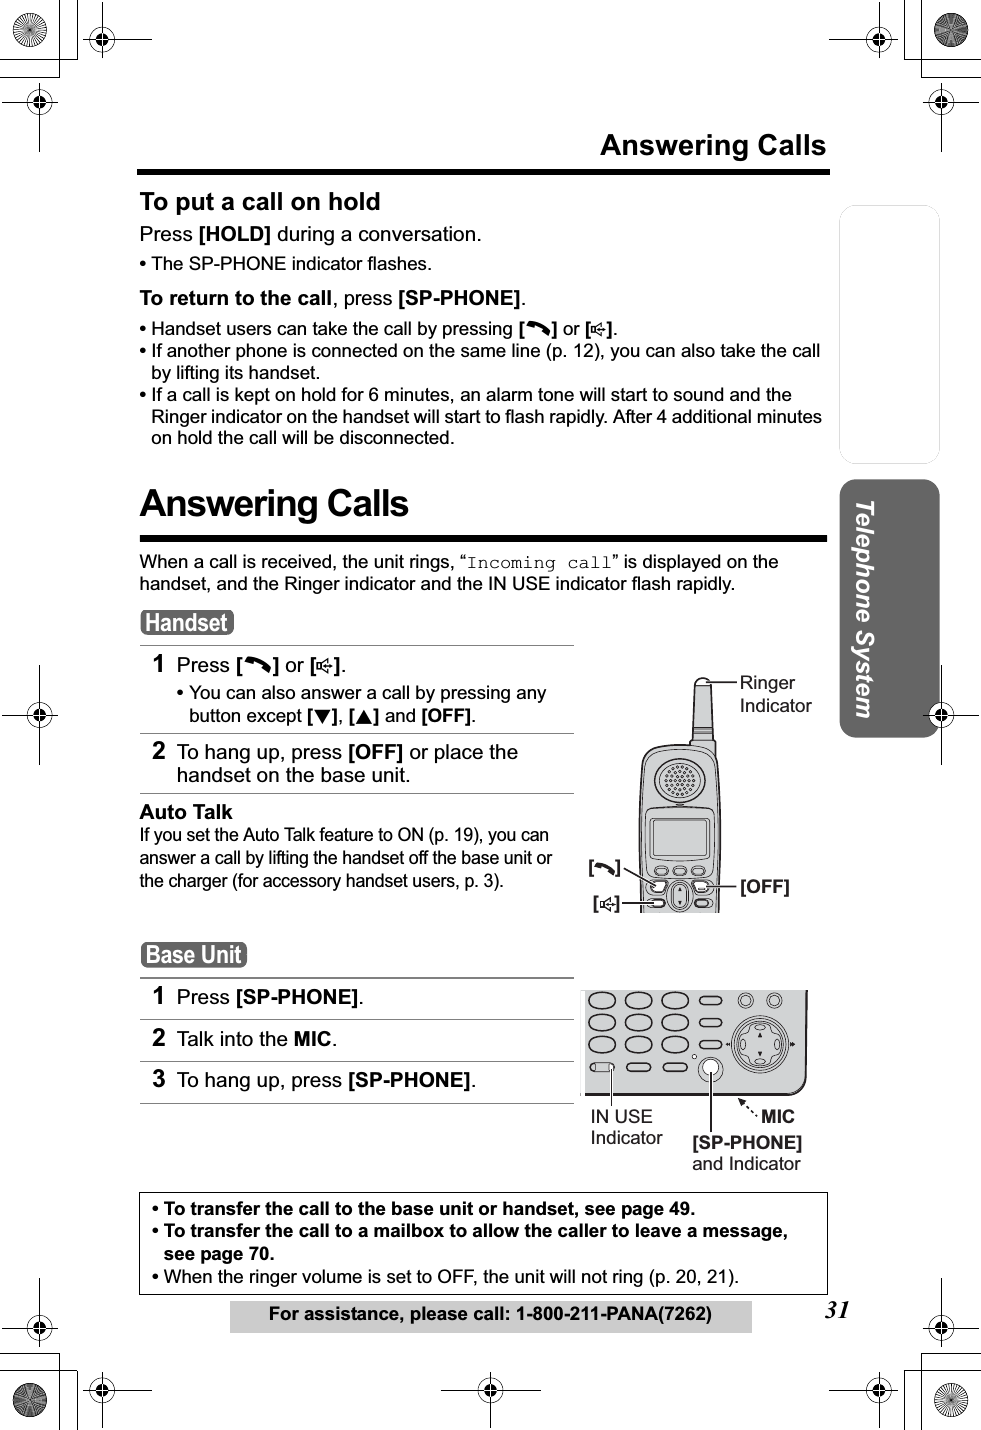 Useful InformationAnswering SystemPreparation31Answering CallsFor assistance, please call: 1-800-211-PANA(7262)Telephone SystemTo put a call on holdPress [HOLD] during a conversation.•The SP-PHONE indicator flashes.To return to the call, press [SP-PHONE].•Handset users can take the call by pressing [C]or [s].•If another phone is connected on the same line (p. 12), you can also take the call by lifting its handset.•If a call is kept on hold for 6 minutes, an alarm tone will start to sound and the Ringer indicator on the handset will start to flash rapidly. After 4 additional minutes on hold the call will be disconnected.Answering CallsWhen a call is received, the unit rings, “Incoming call” is displayed on the handset, and the Ringer indicator and the IN USE indicator flash rapidly. 1Press [C]or [s].•You can also answer a call by pressing any button except [d], [B] and [OFF].2To hang up, press [OFF] or place the handset on the base unit. Auto TalkIf you set the Auto Talk feature to ON (p. 19), you can answer a call by lifting the handset off the base unit or the charger (for accessory handset users, p. 3).1Press [SP-PHONE].2Talk into the MIC.3To hang up, press [SP-PHONE].• To transfer the call to the base unit or handset, see page 49. • To transfer the call to a mailbox to allow the caller to leave a message, see page 70.•When the ringer volume is set to OFF, the unit will not ring (p. 20, 21). Handset[   ][    ][OFF]RingerIndicatorBase UnitMIC[SP-PHONE]and IndicatorIN USEIndicator